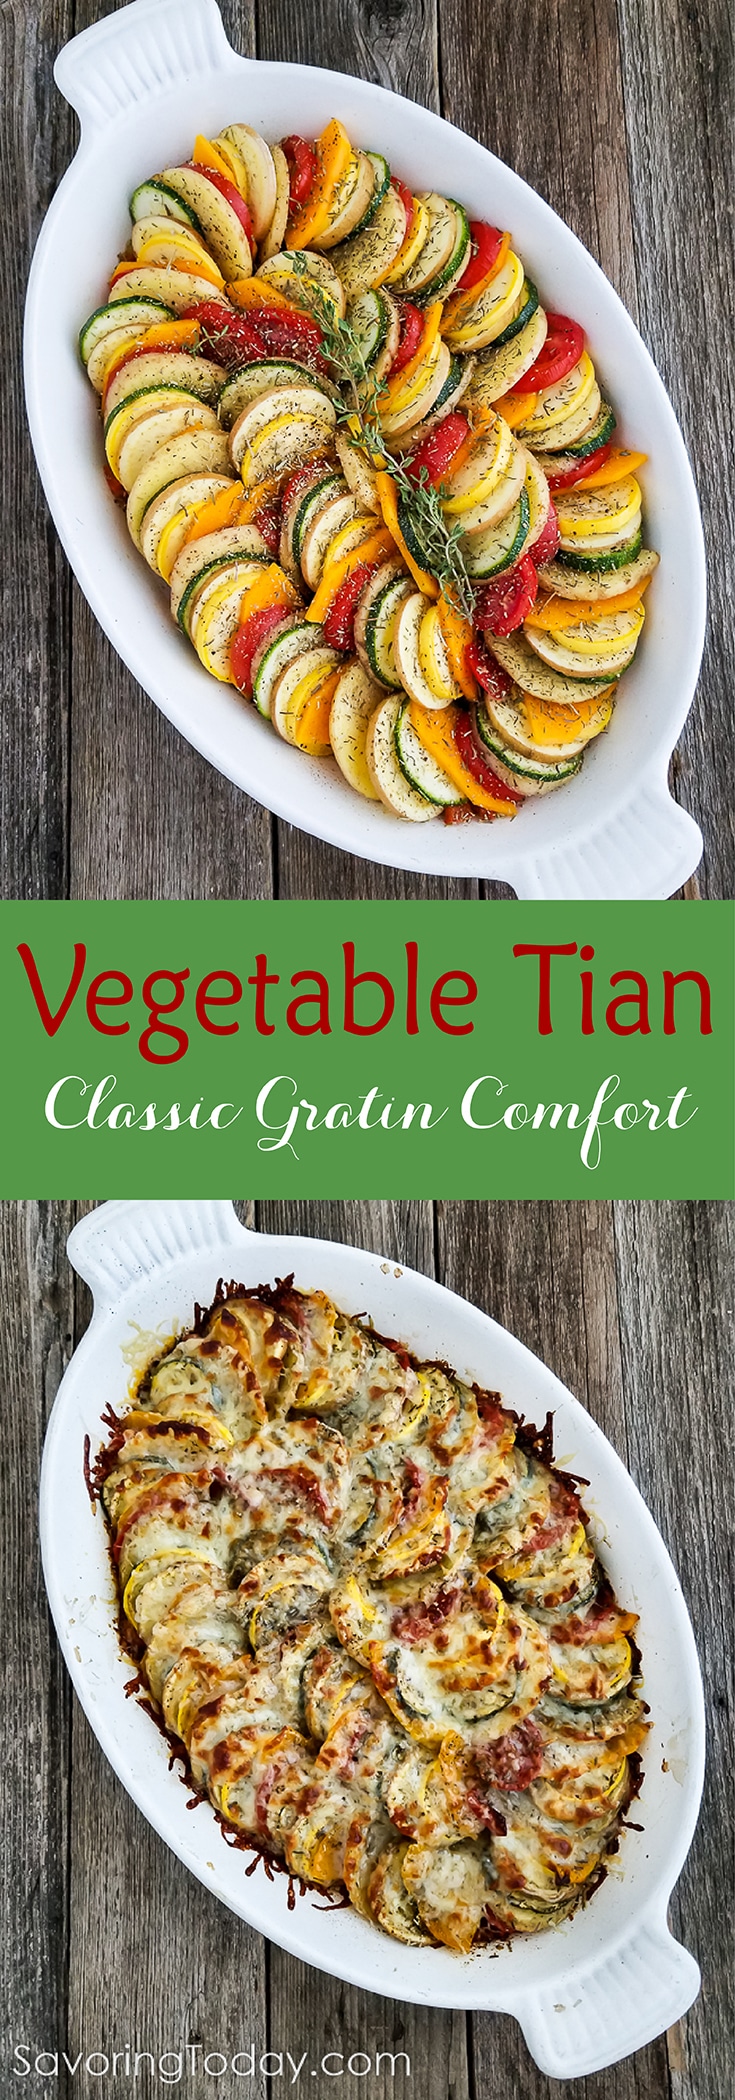 Vegetable Tian: Classic Gratin Comfort for Healthy Holiday Dinners